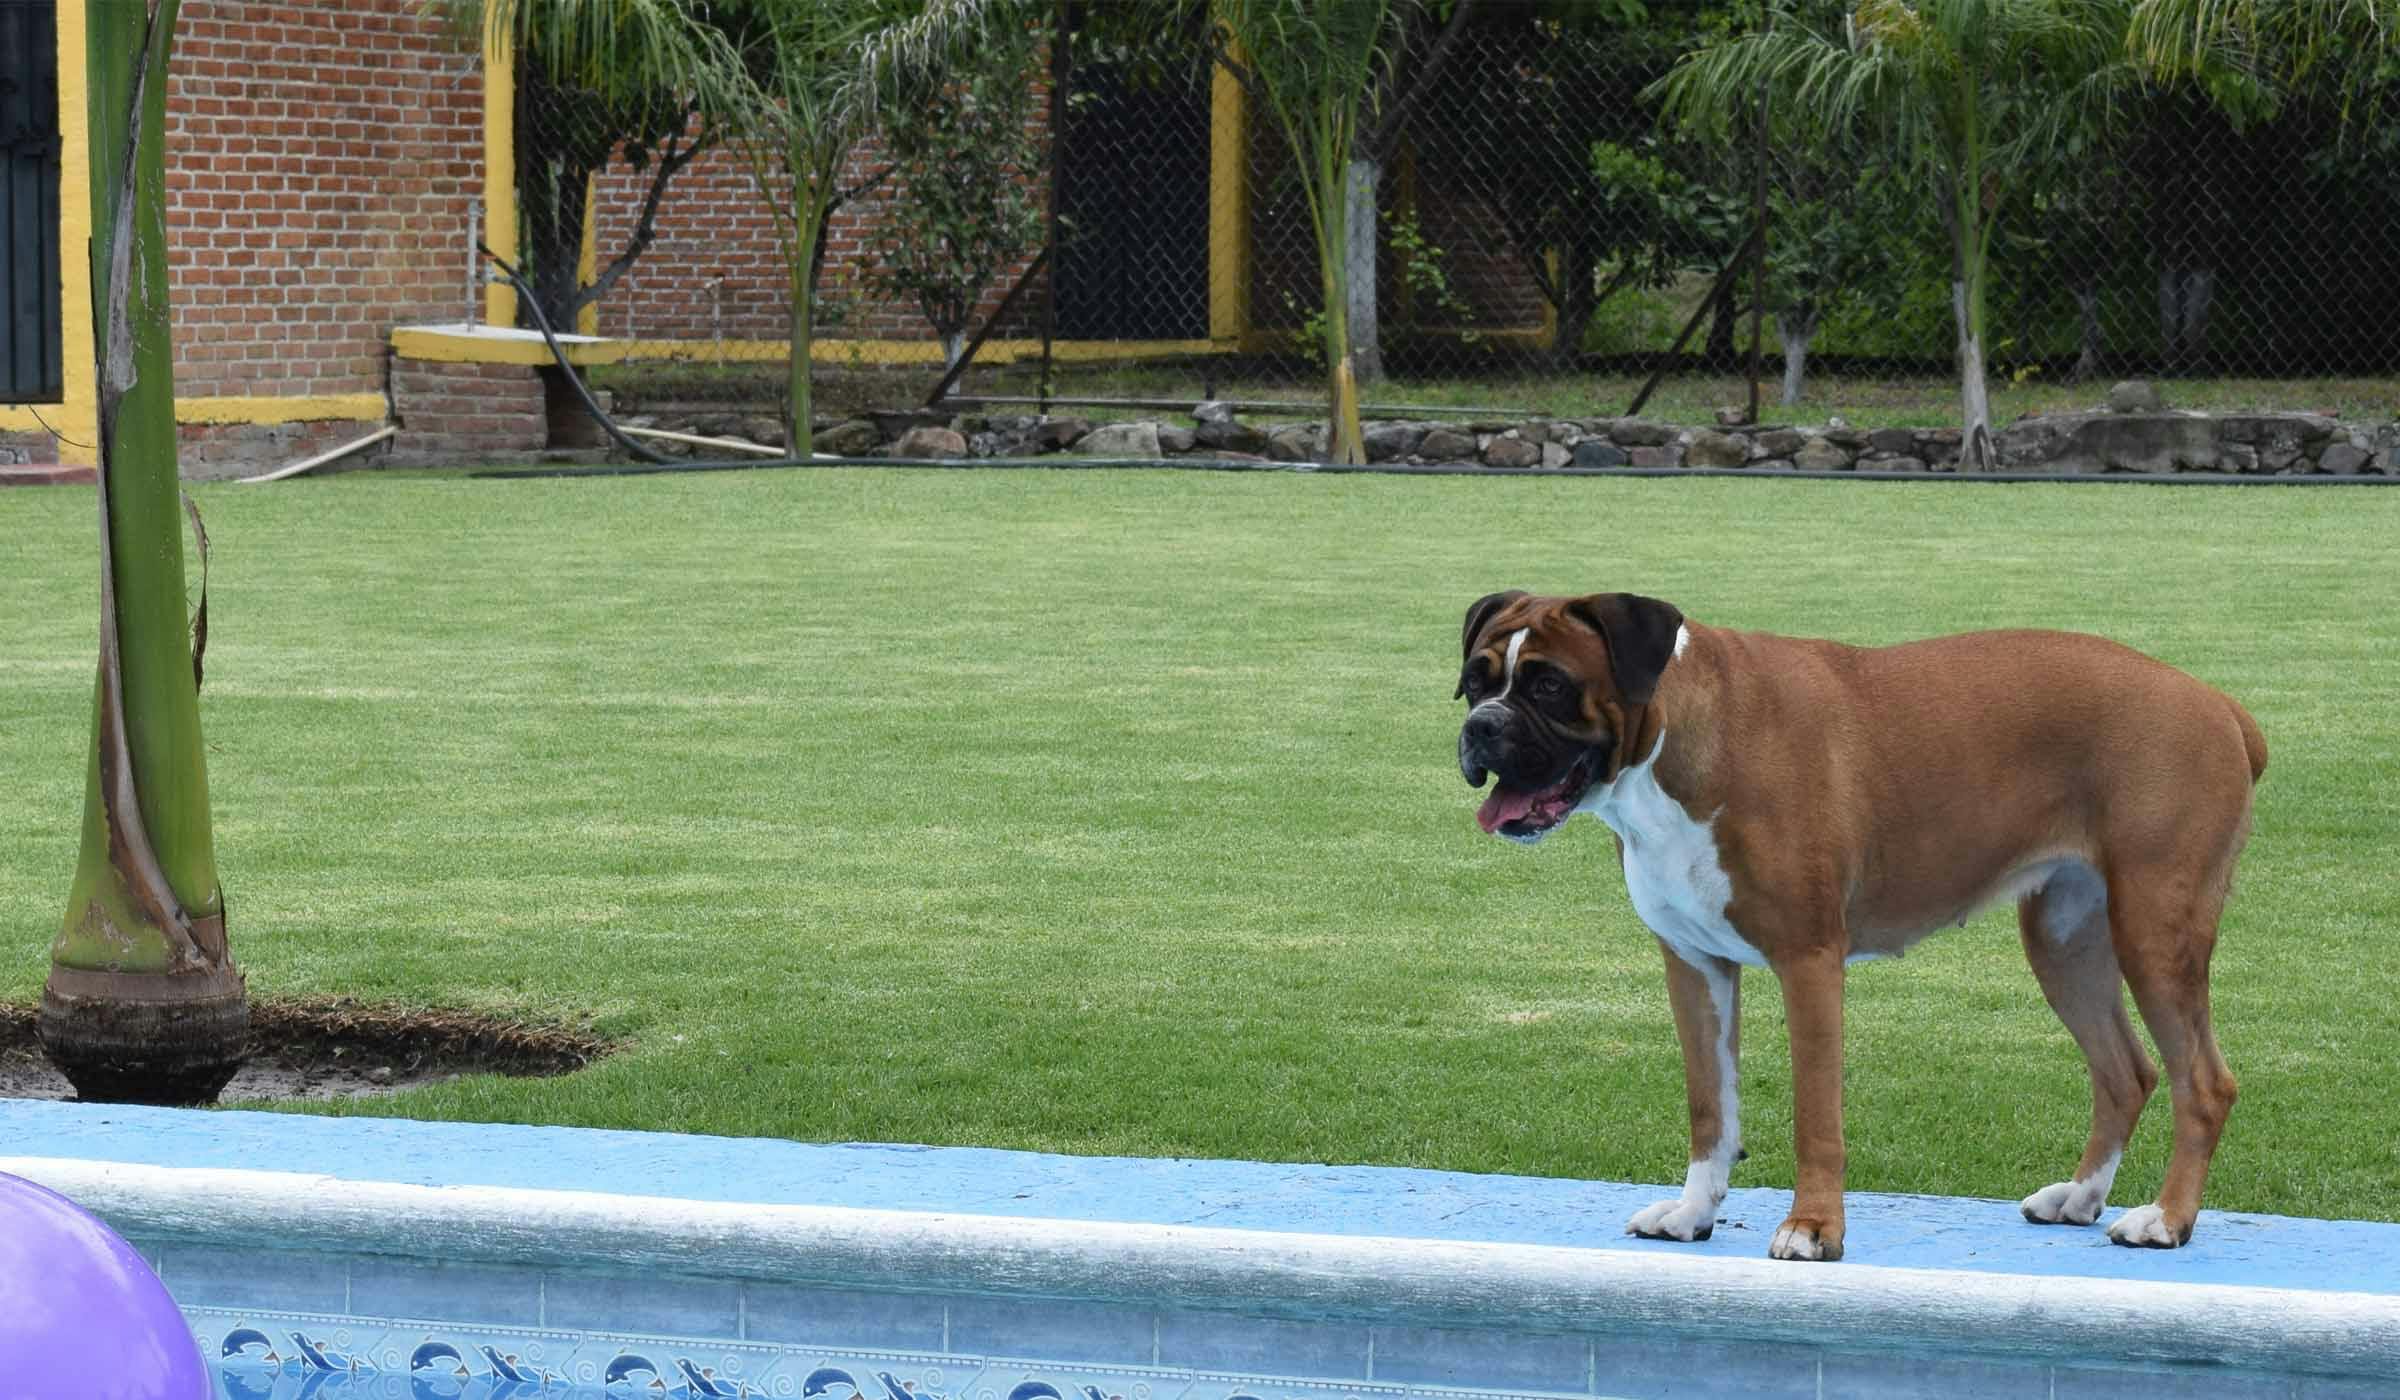 How to Train Your Older Dog to Stay Off a Pool Cover | Wag!